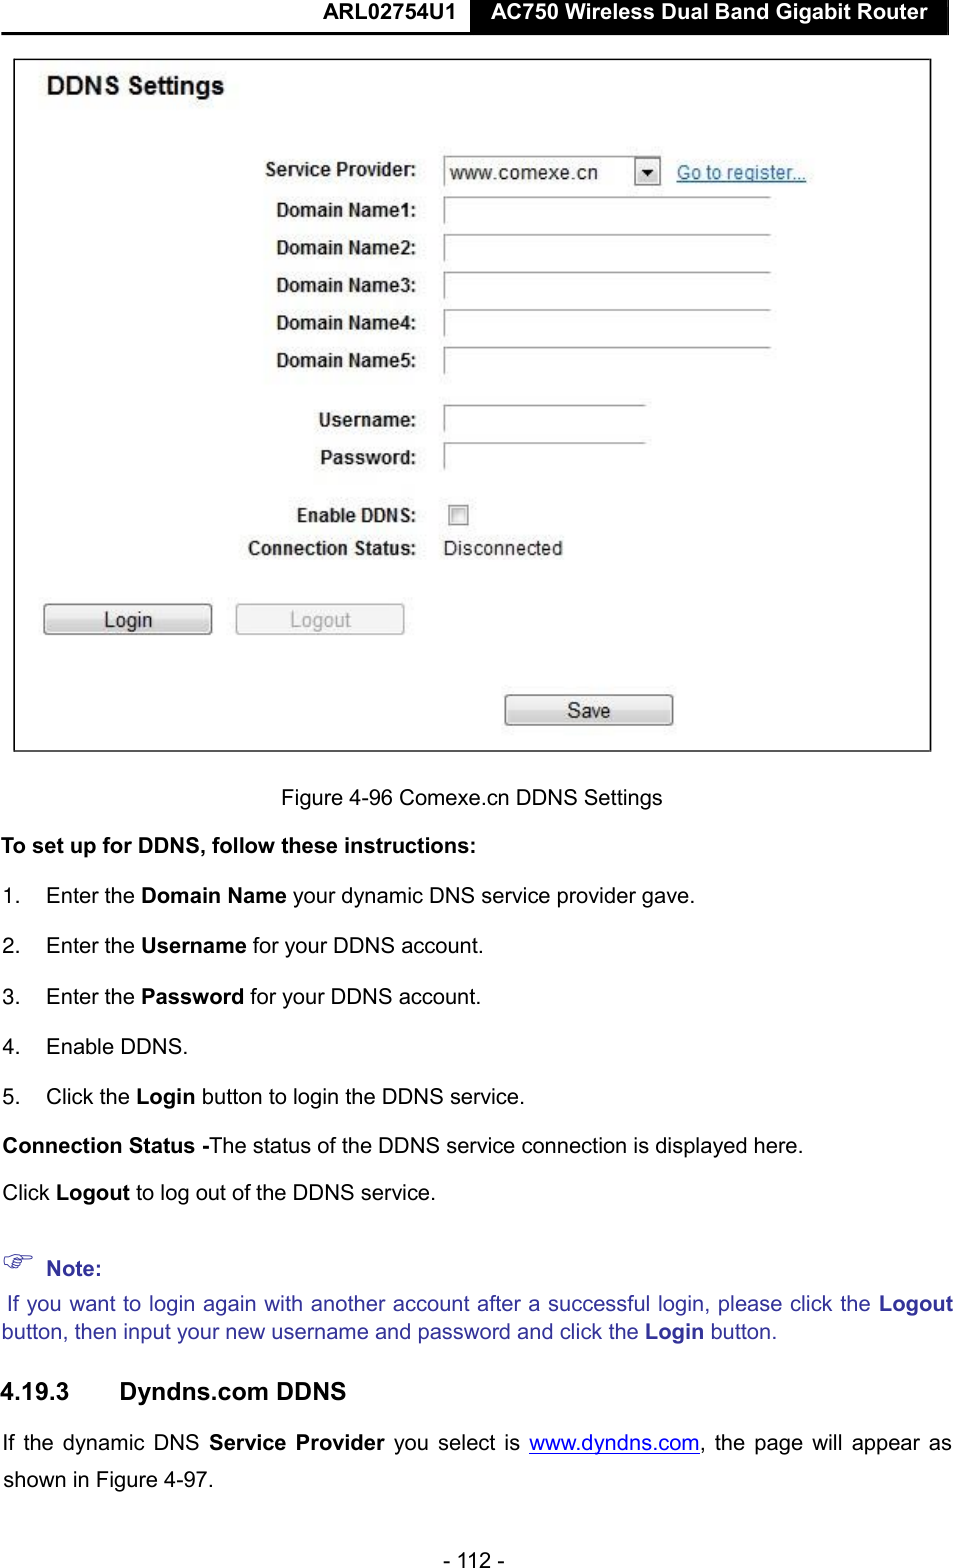  ARL02754U1  AC750 Wireless Dual Band Gigabit Router    - 112 -   Figure 4-96 Comexe.cn DDNS Settings  To set up for DDNS, follow these instructions:  1. Enter the Domain Name your dynamic DNS service provider gave.   2. Enter the Username for your DDNS account.   3. Enter the Password for your DDNS account.   4. Enable DDNS.  5. Click the Login button to login the DDNS service.   Connection Status -The status of the DDNS service connection is displayed here.  Click Logout to log out of the DDNS service.    Note:   If you want to login again with another account after a successful login, please click the Logout button, then input your new username and password and click the Login button.  4.19.3  Dyndns.com DDNS  If the dynamic DNS  Service  Provider you select is www.dyndns.com, the page  will appear as shown in Figure 4-97.    